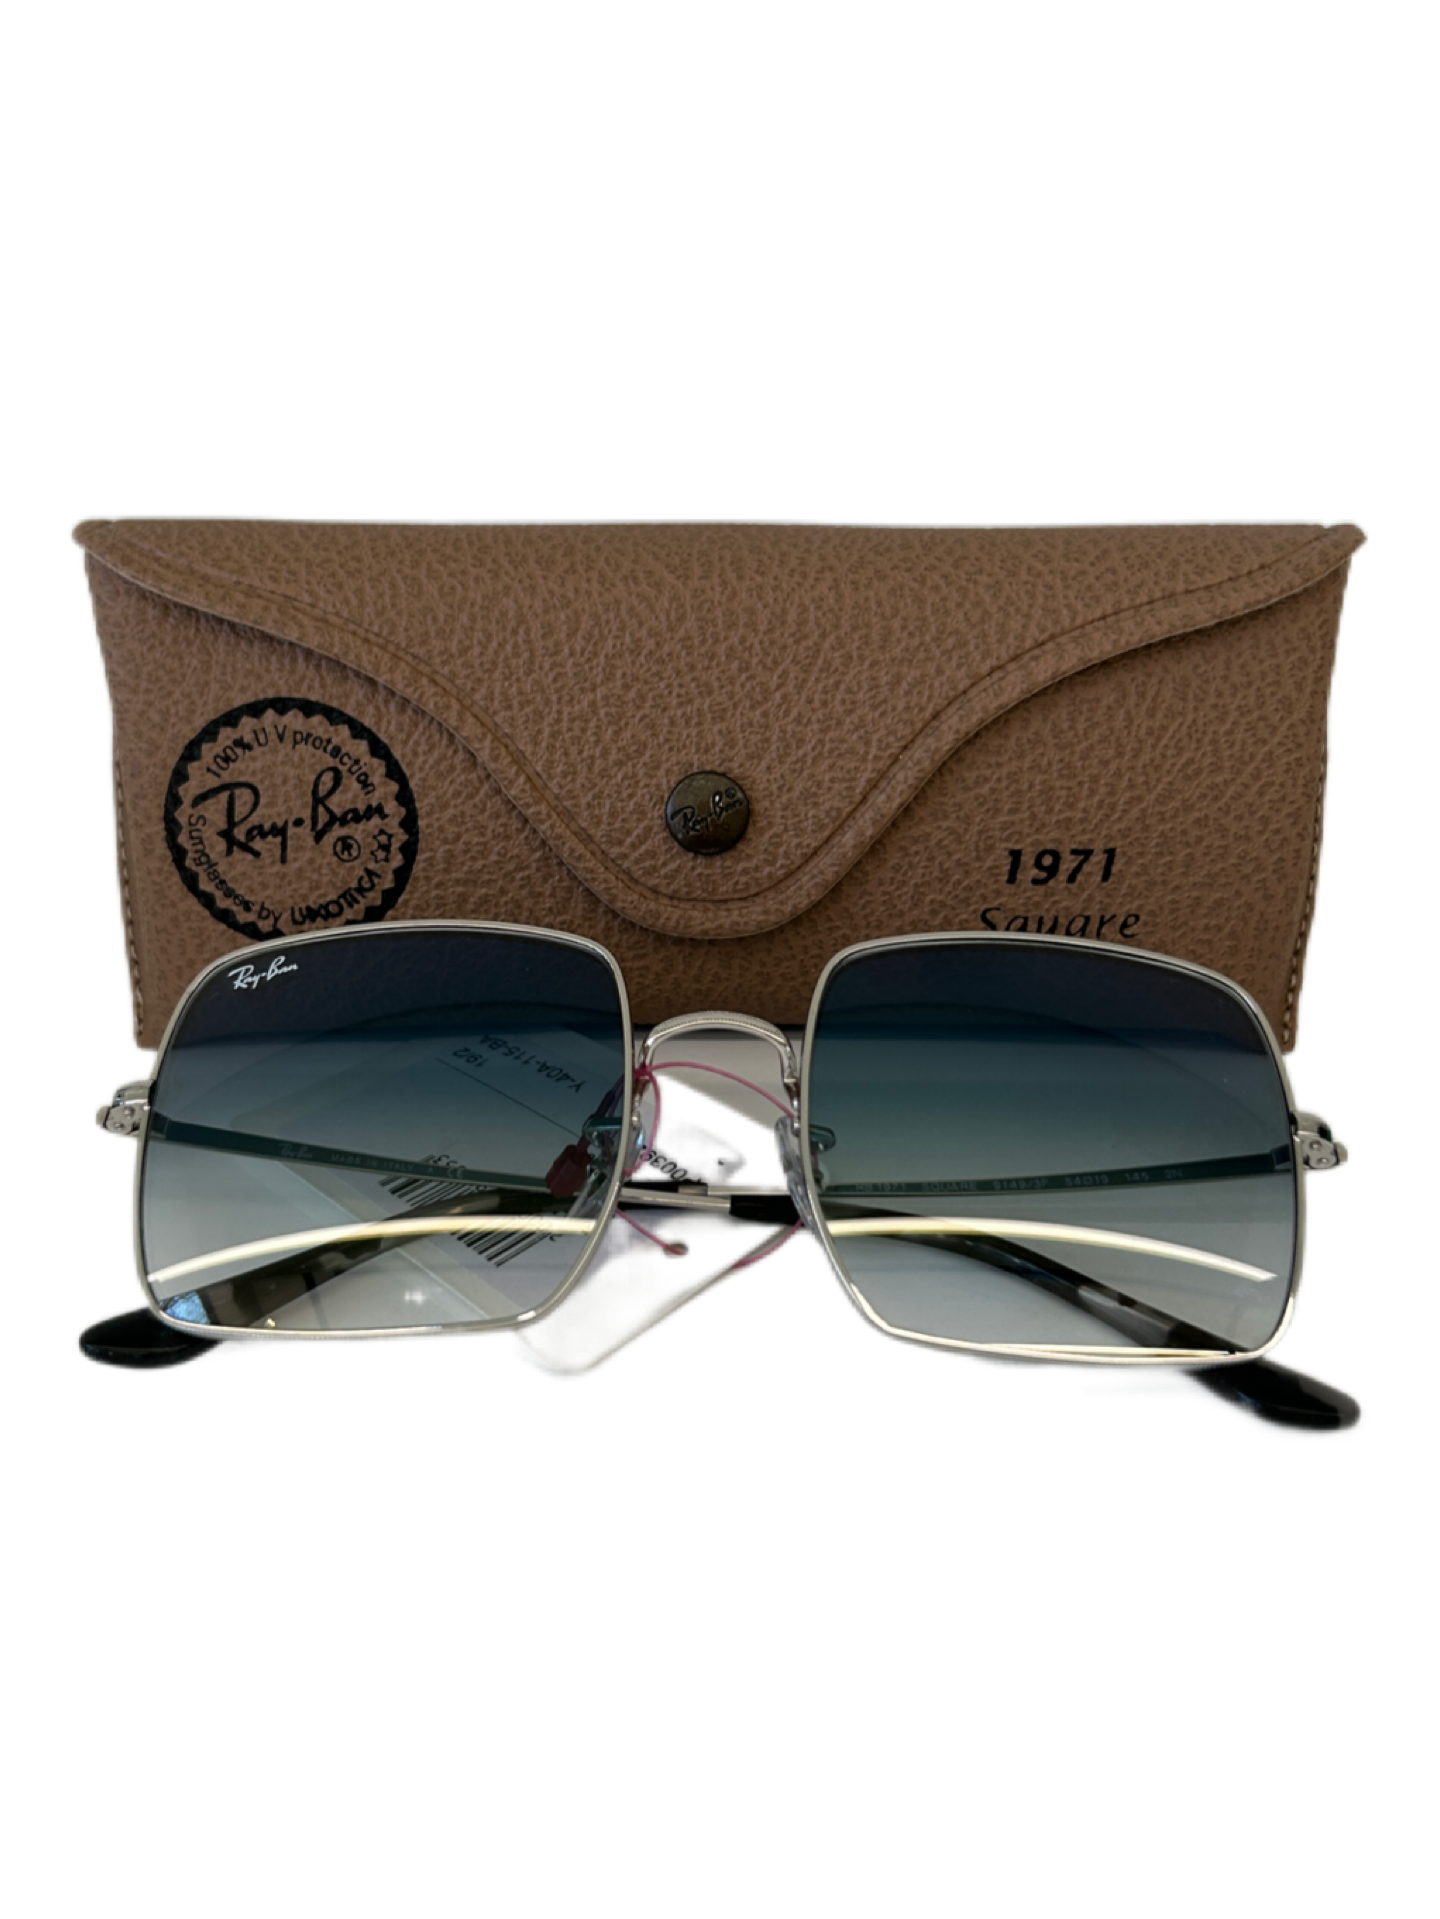 Ray-Ban Square Silver-Framed Sunglasses with Blue-Gradient Lenses